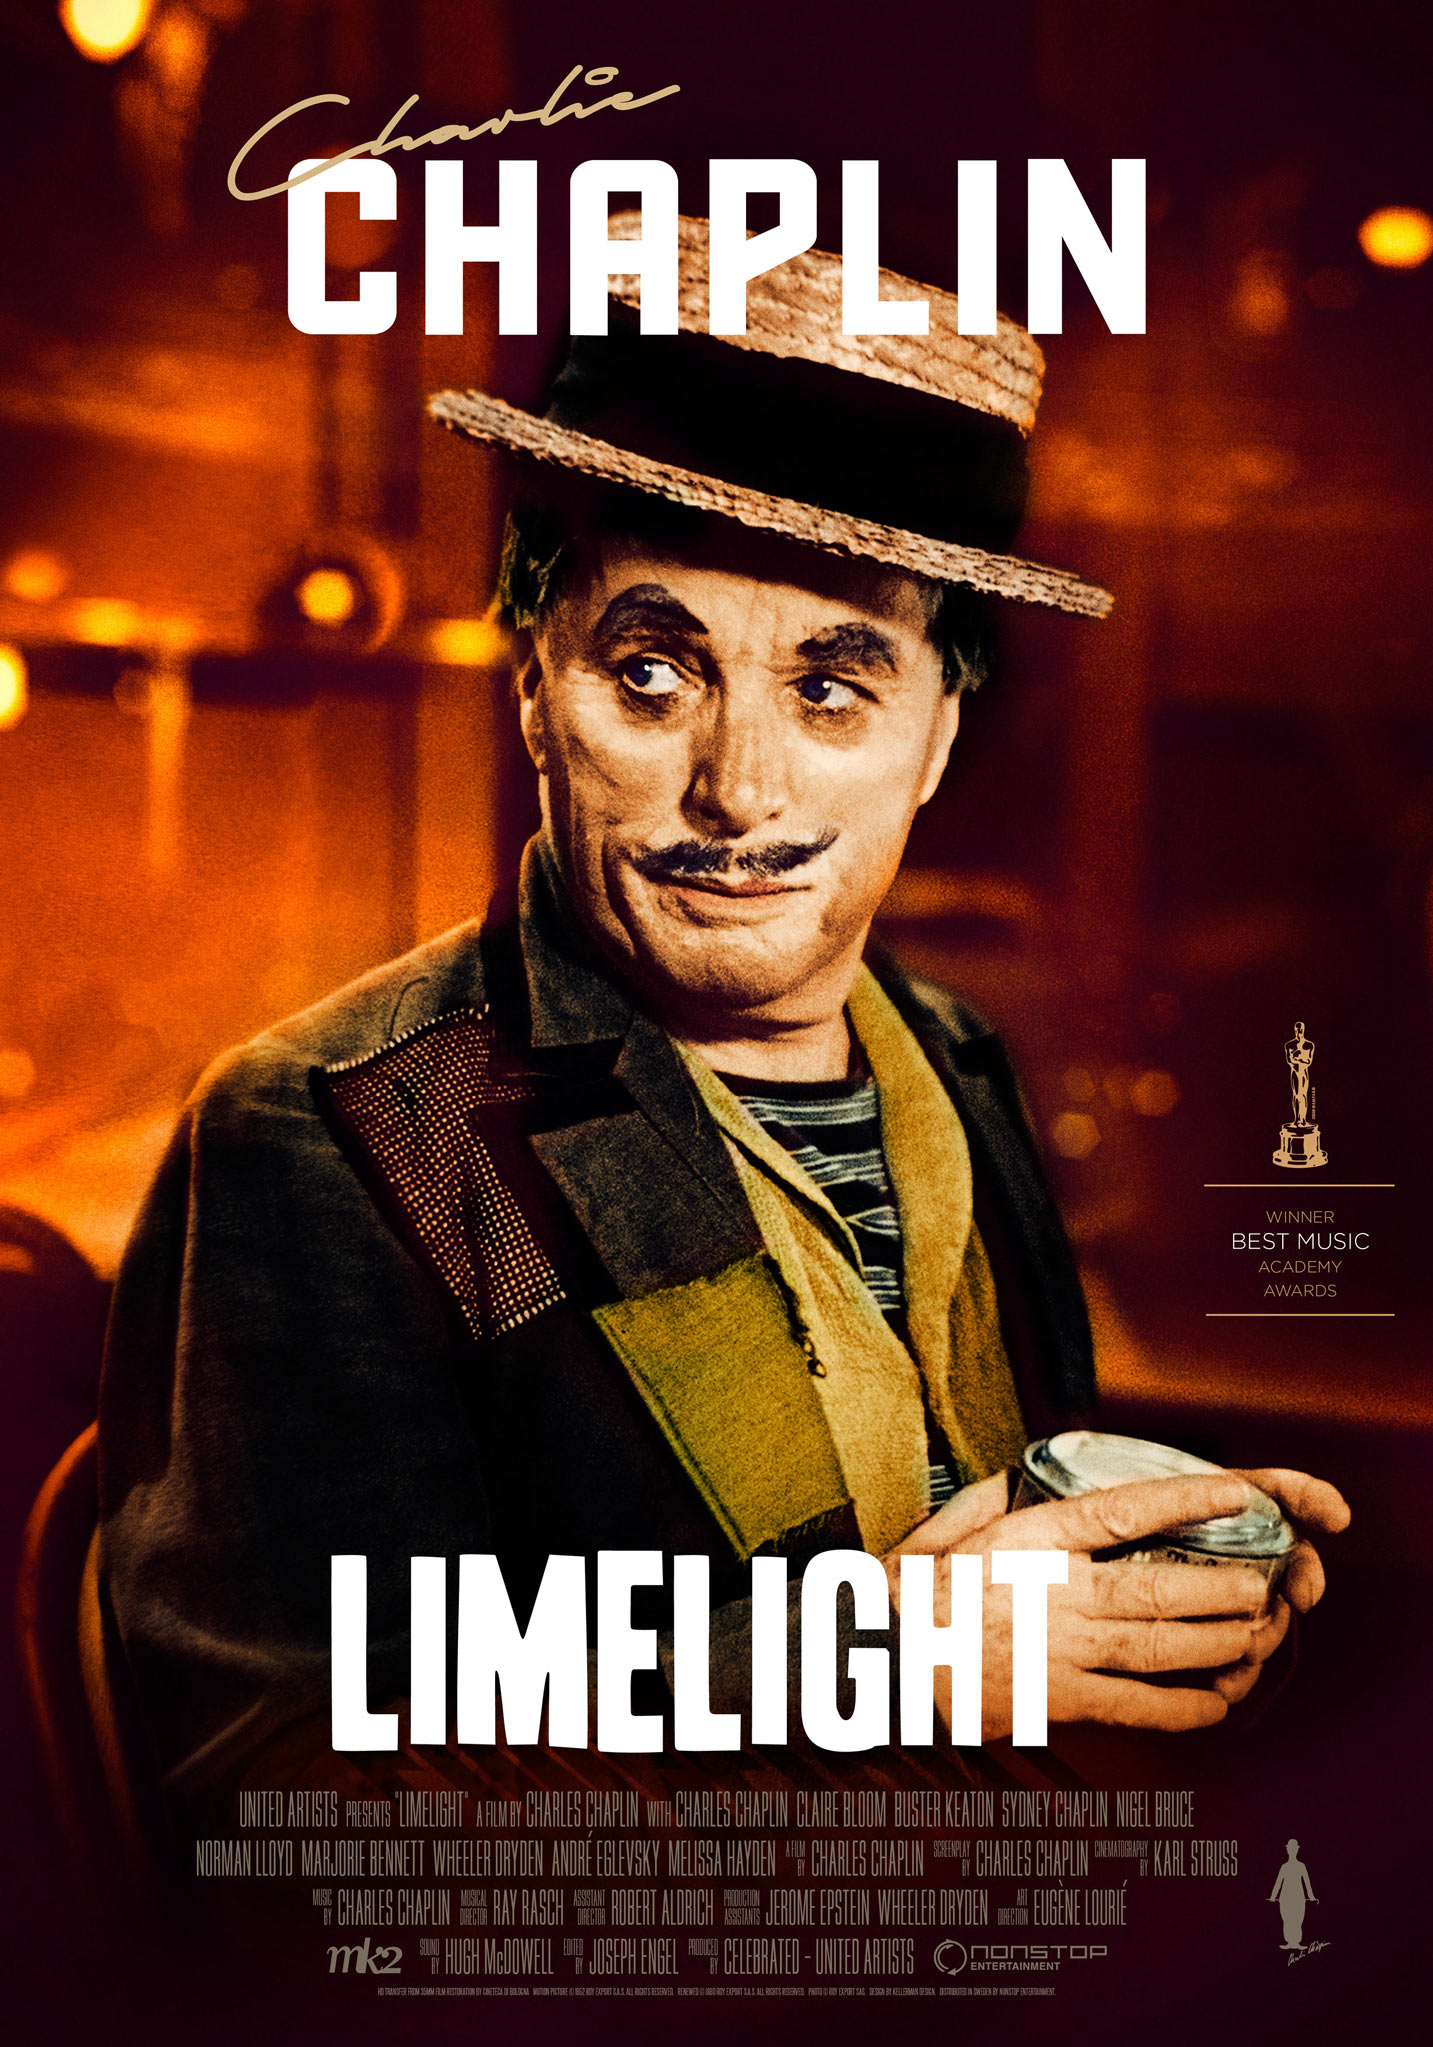 Limelight (1952) theatrical onesheet